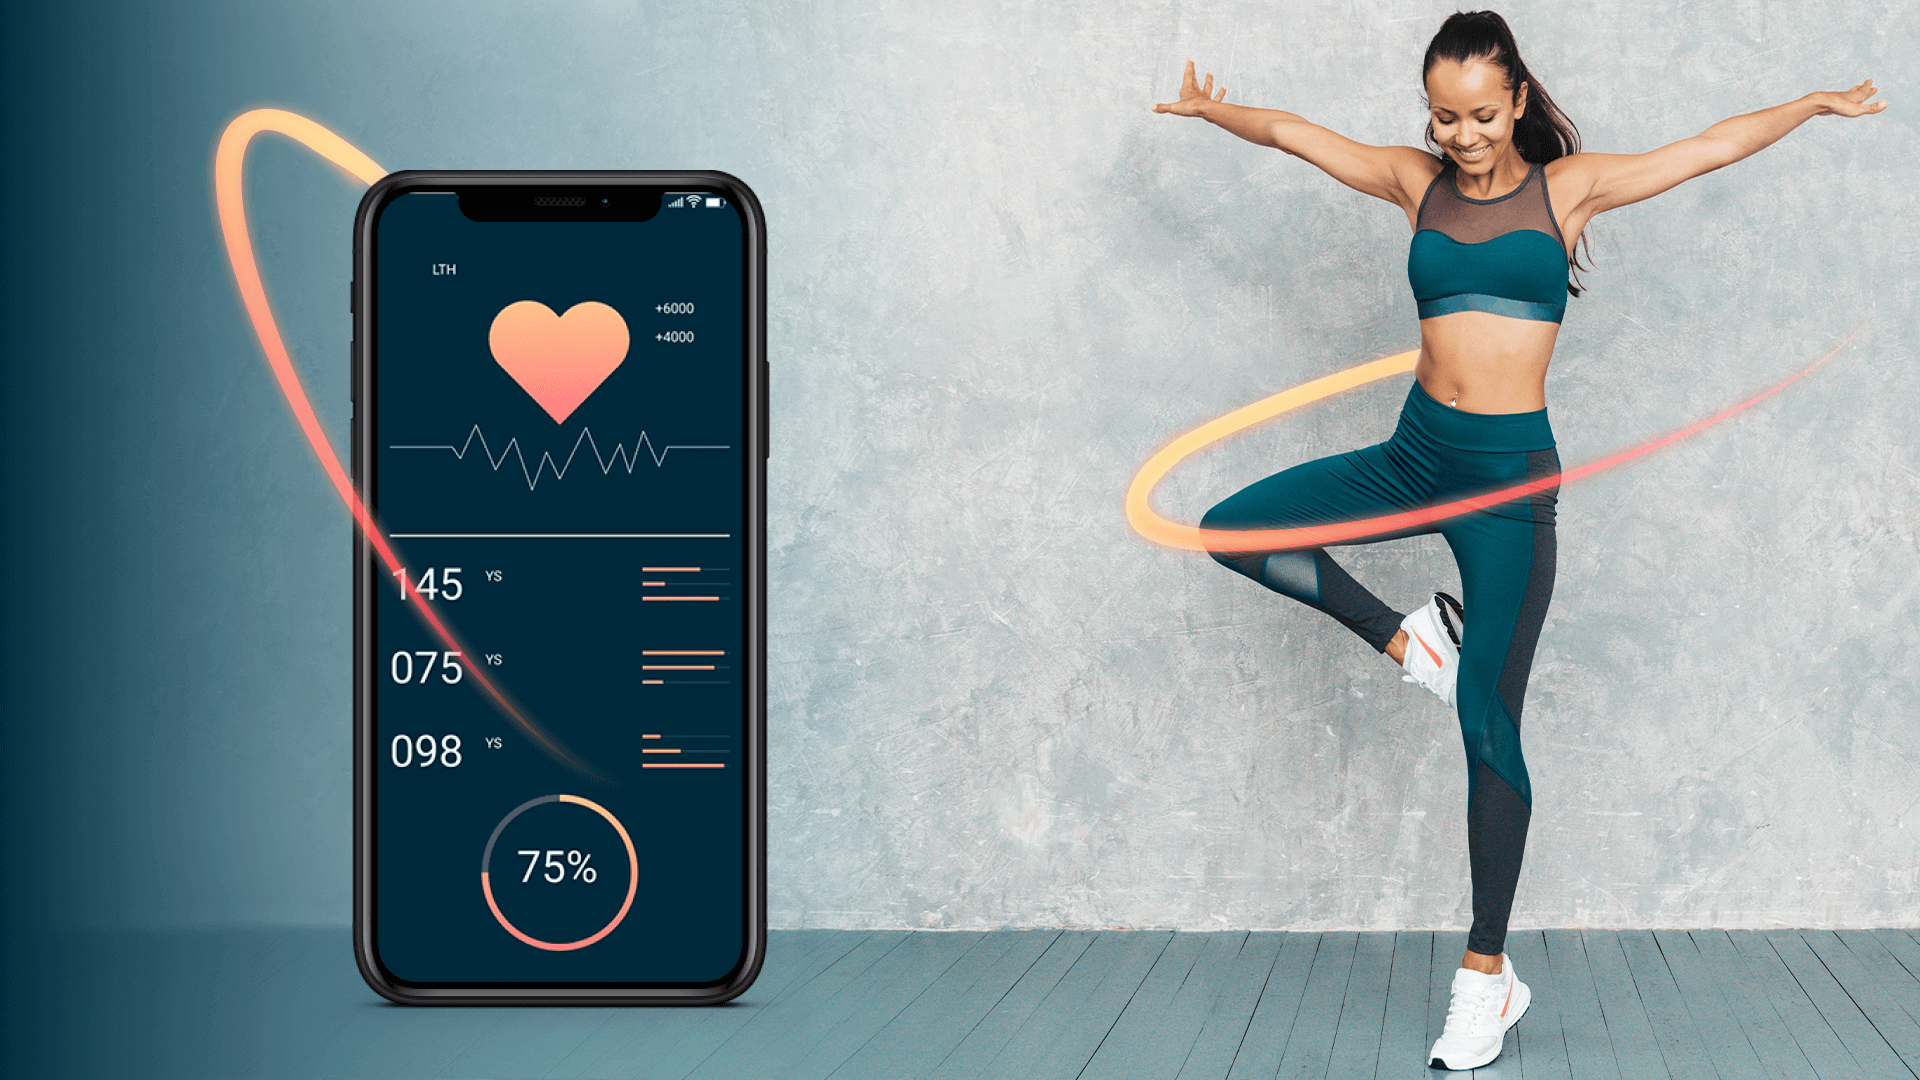 One of the vital steps in how to make a fitness app successful is finding a category that suits your desired target audience. 